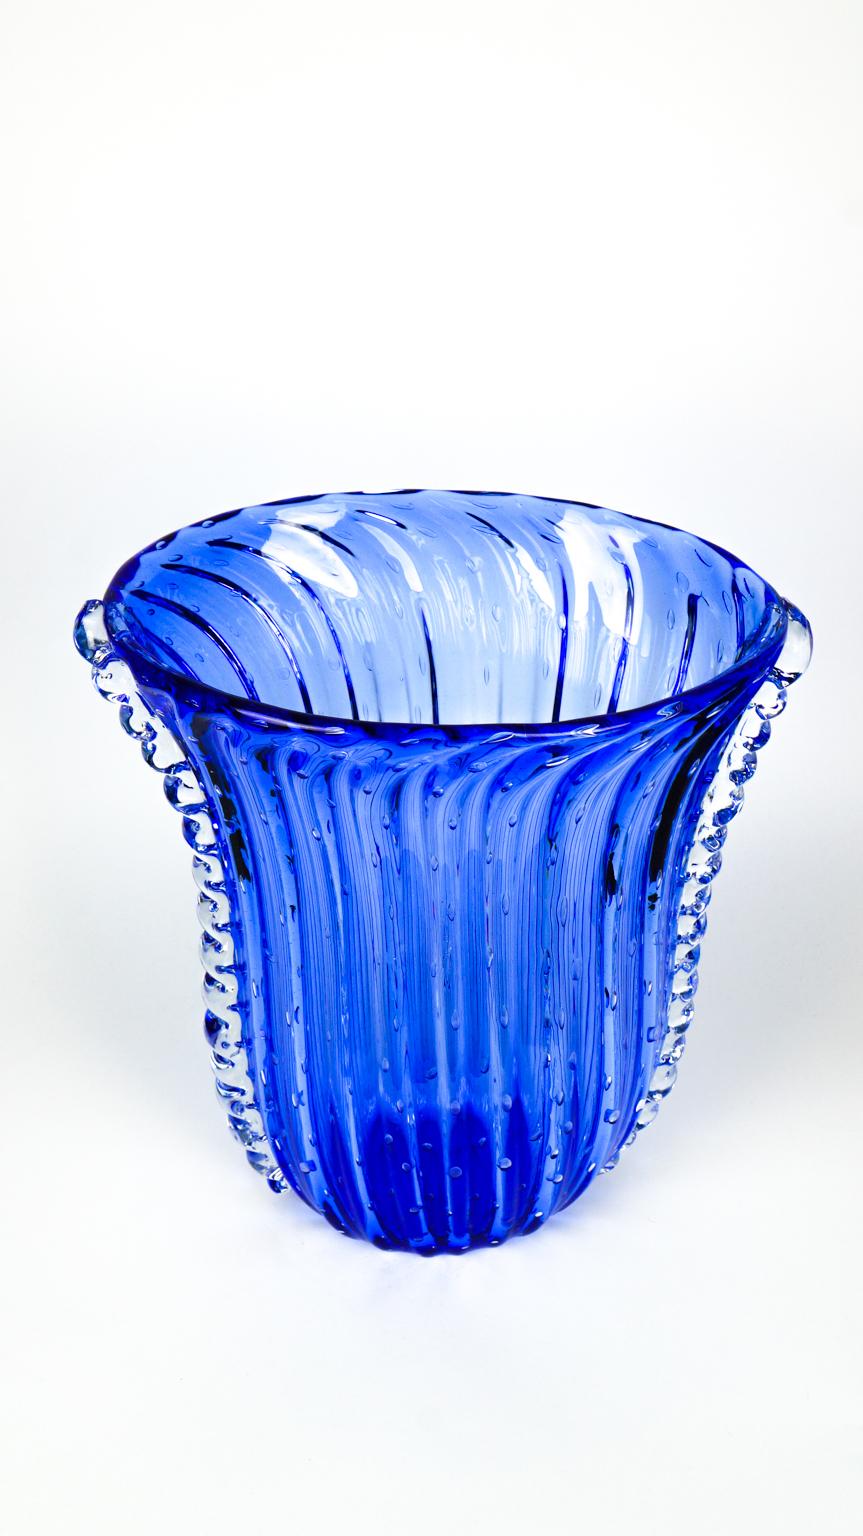 contemporary murano glass vases and vessels collection